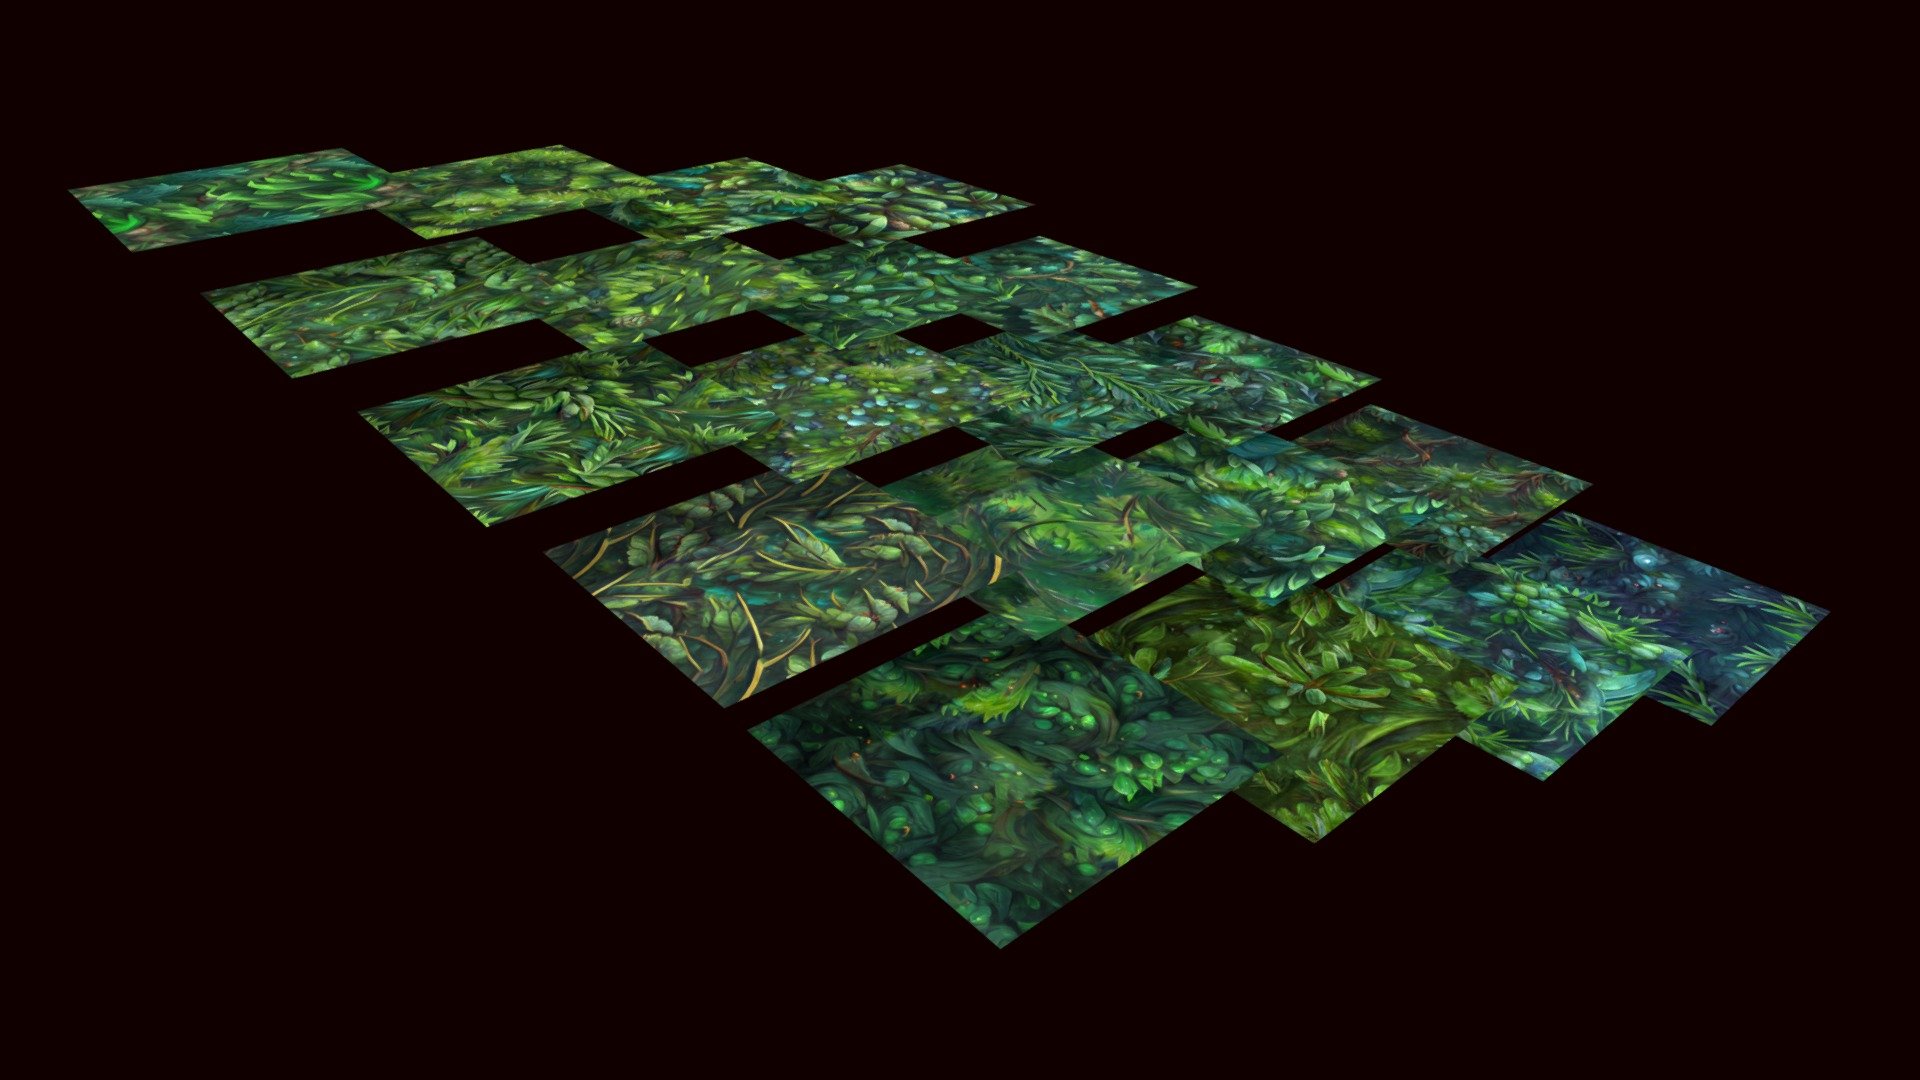 You feel spruce and nettles under the boots. Beneath you, all the hills are covered in pine trees. Mysterious forest awaits..

Textures were made to be tileable, meaning they will have no seams.




20 Color Textures (tileable)

2048 x 2048 size

Hand Painted

Mobile friendly

Help us by rating and commenting, this will motivate us to create more assets and improve :) - Grass: Pine Forest 20 TEXTURES (Handpainted) #2 - Buy Royalty Free 3D model by Texture Me (@textureme) 3d model